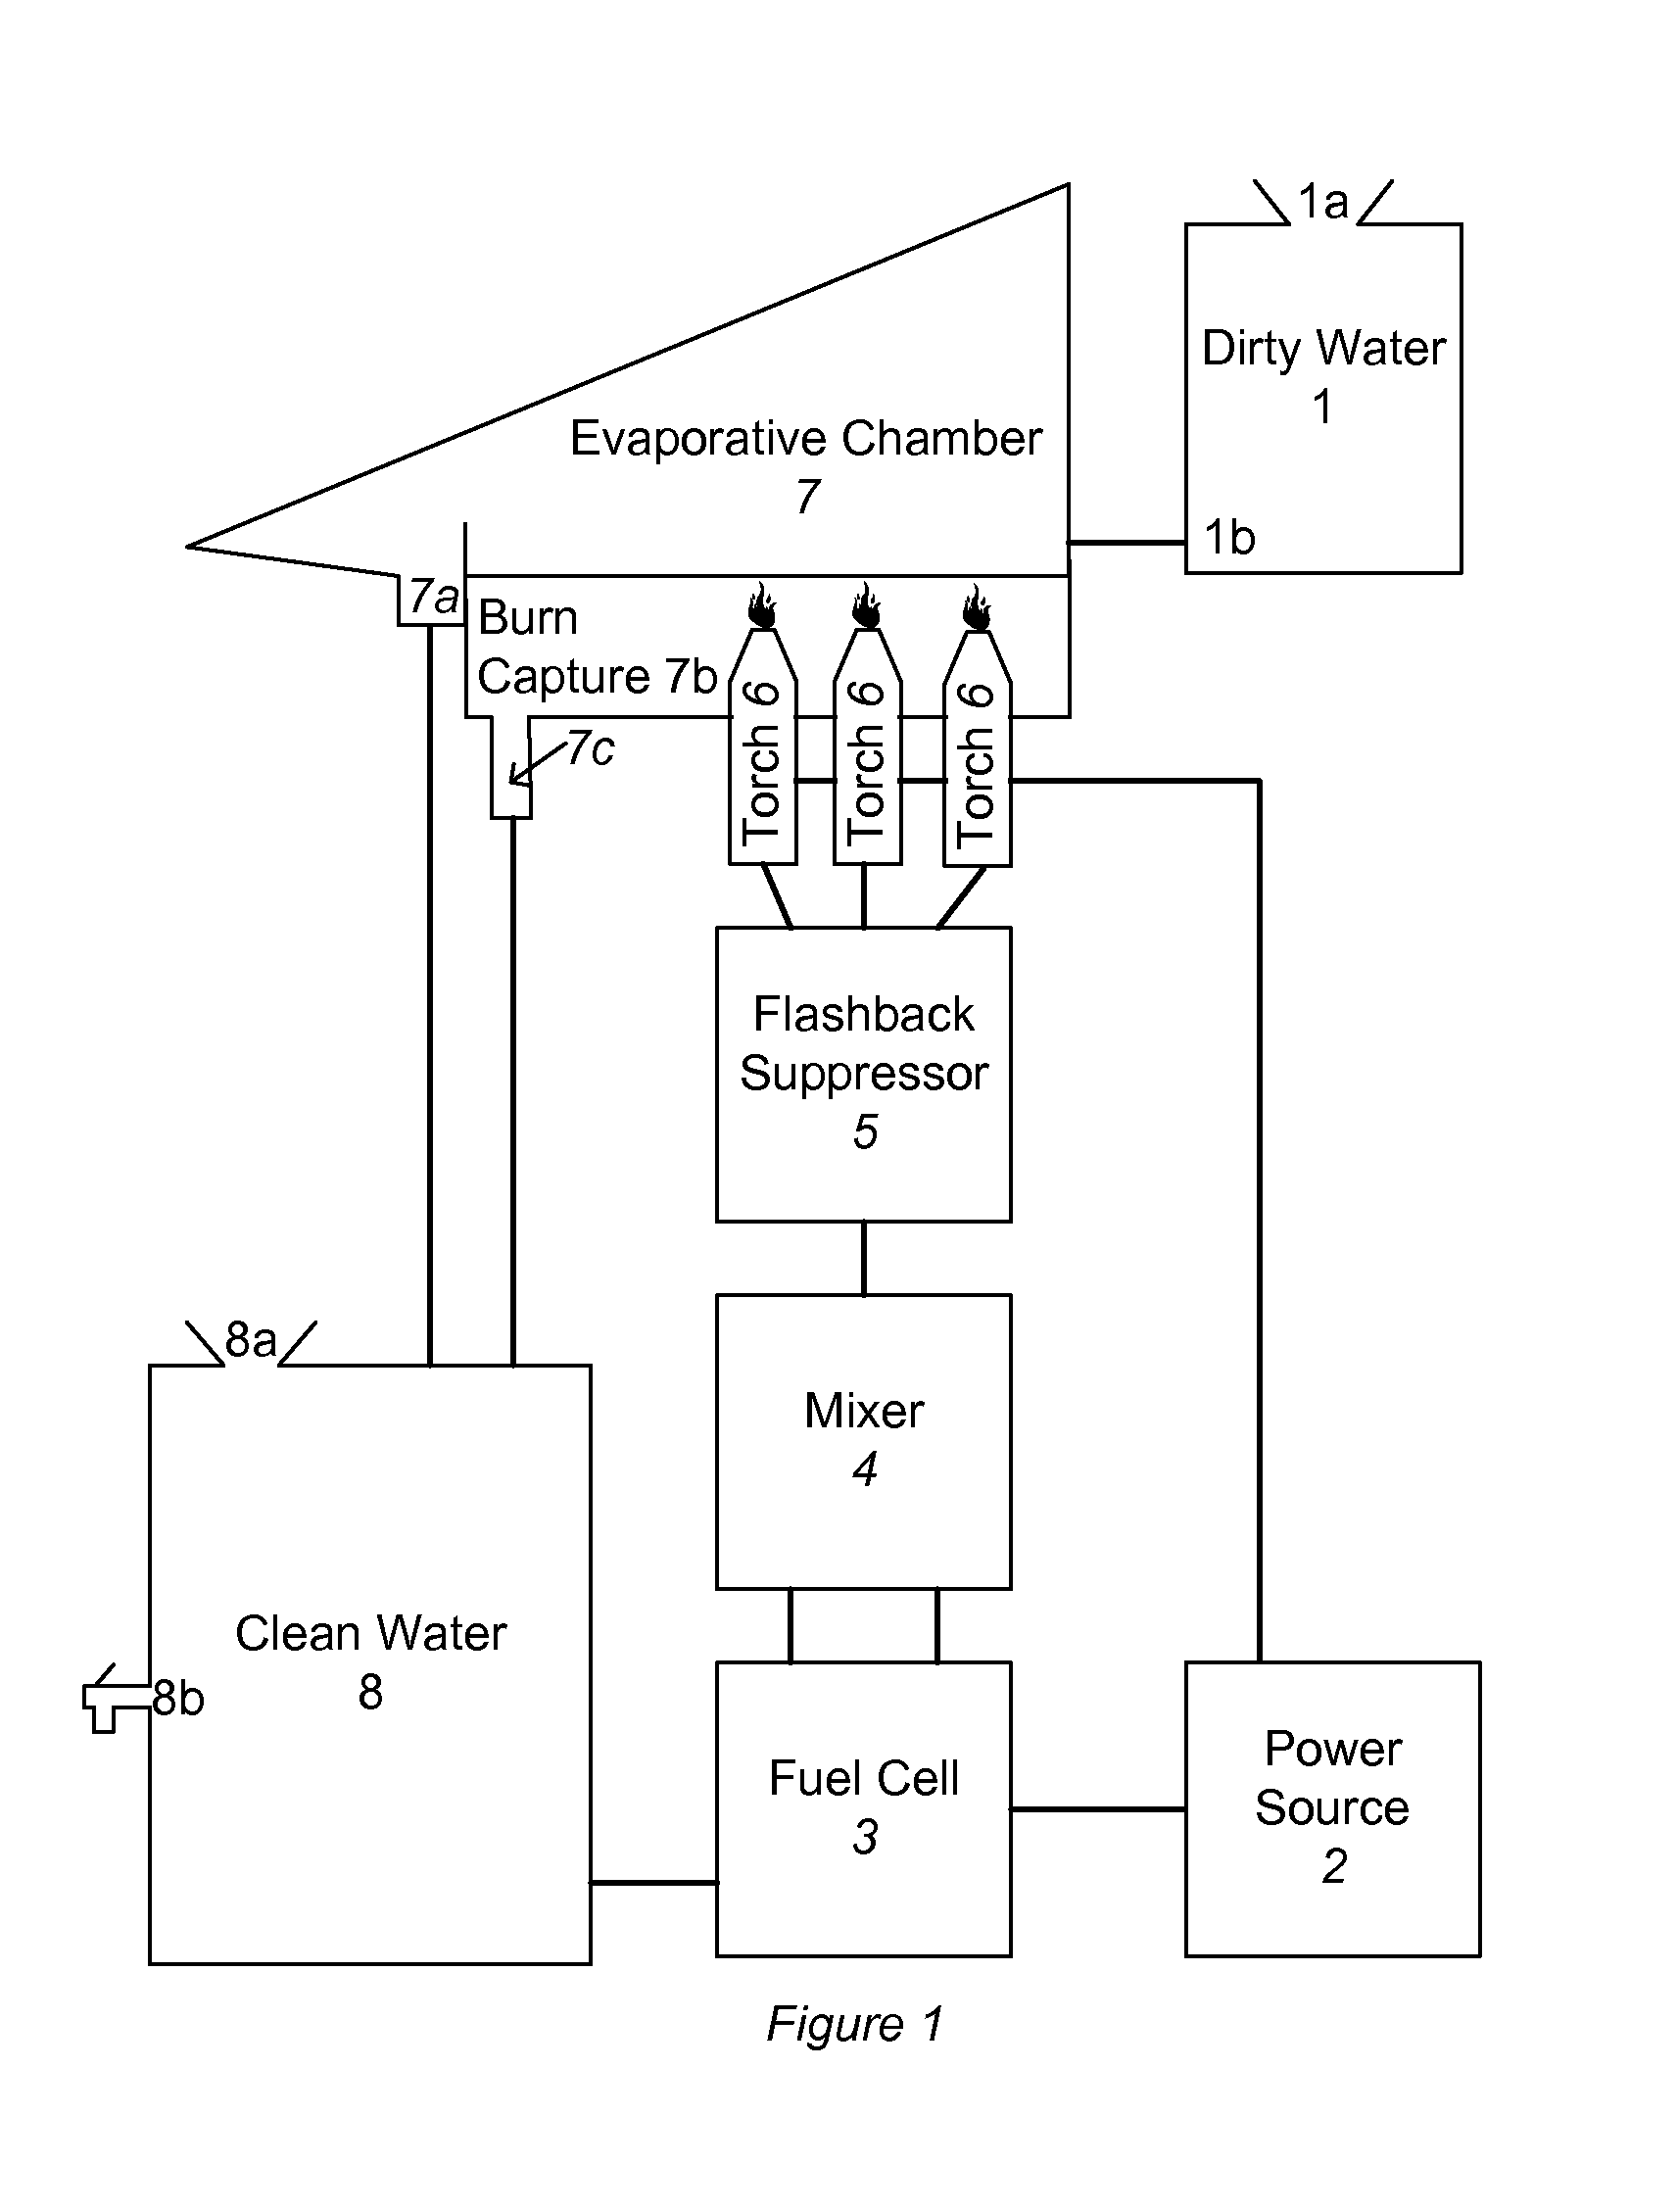 System and Method for Purifying Water